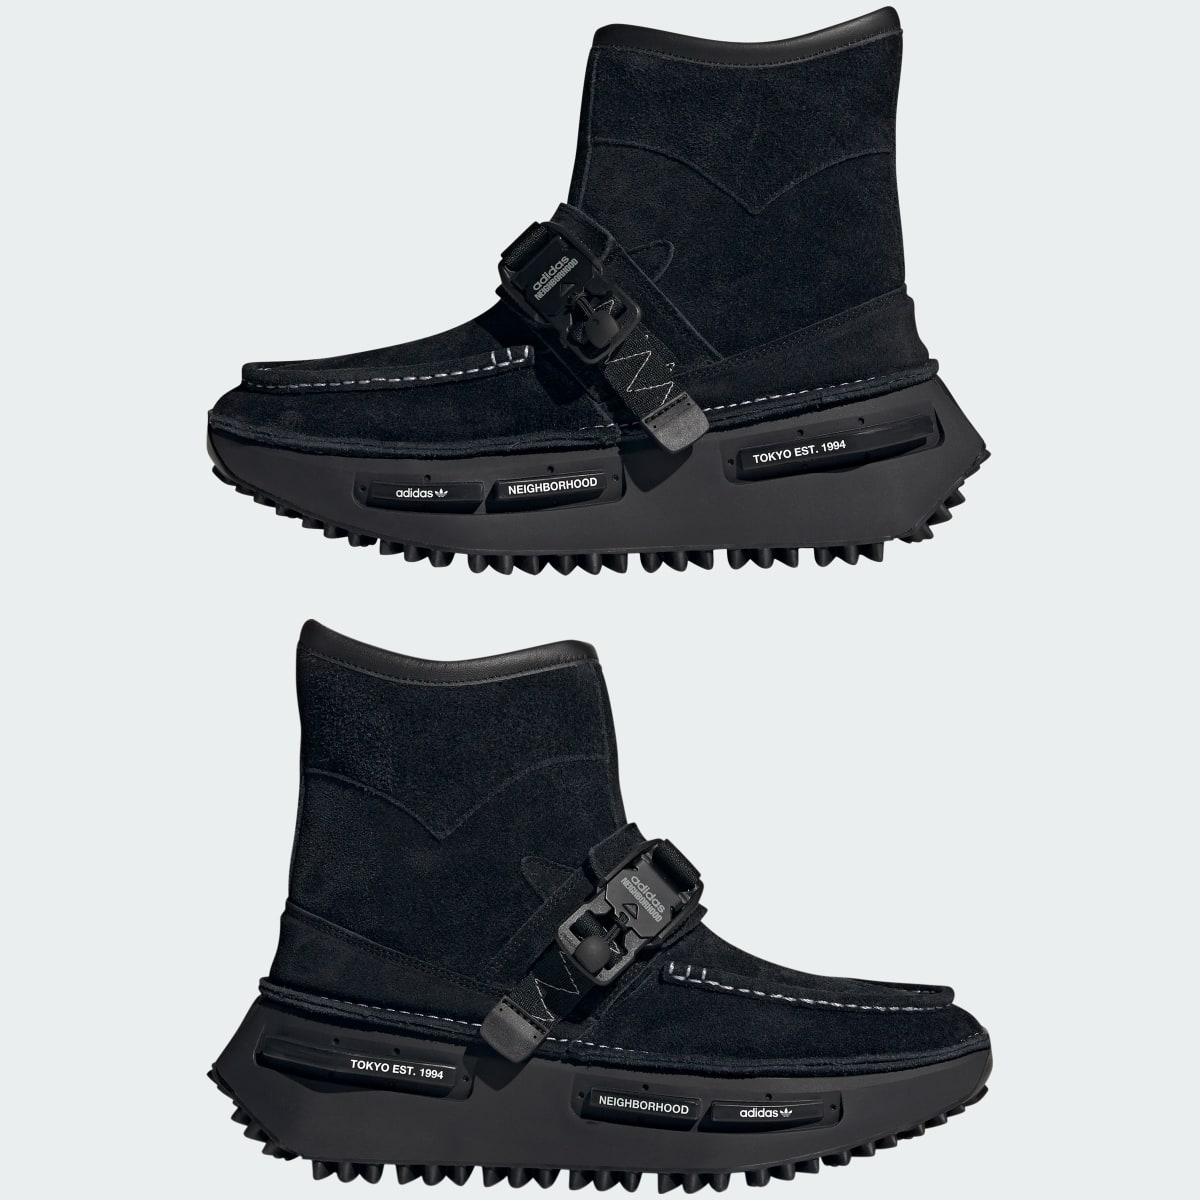 Adidas NMD_S1 Boots. 9